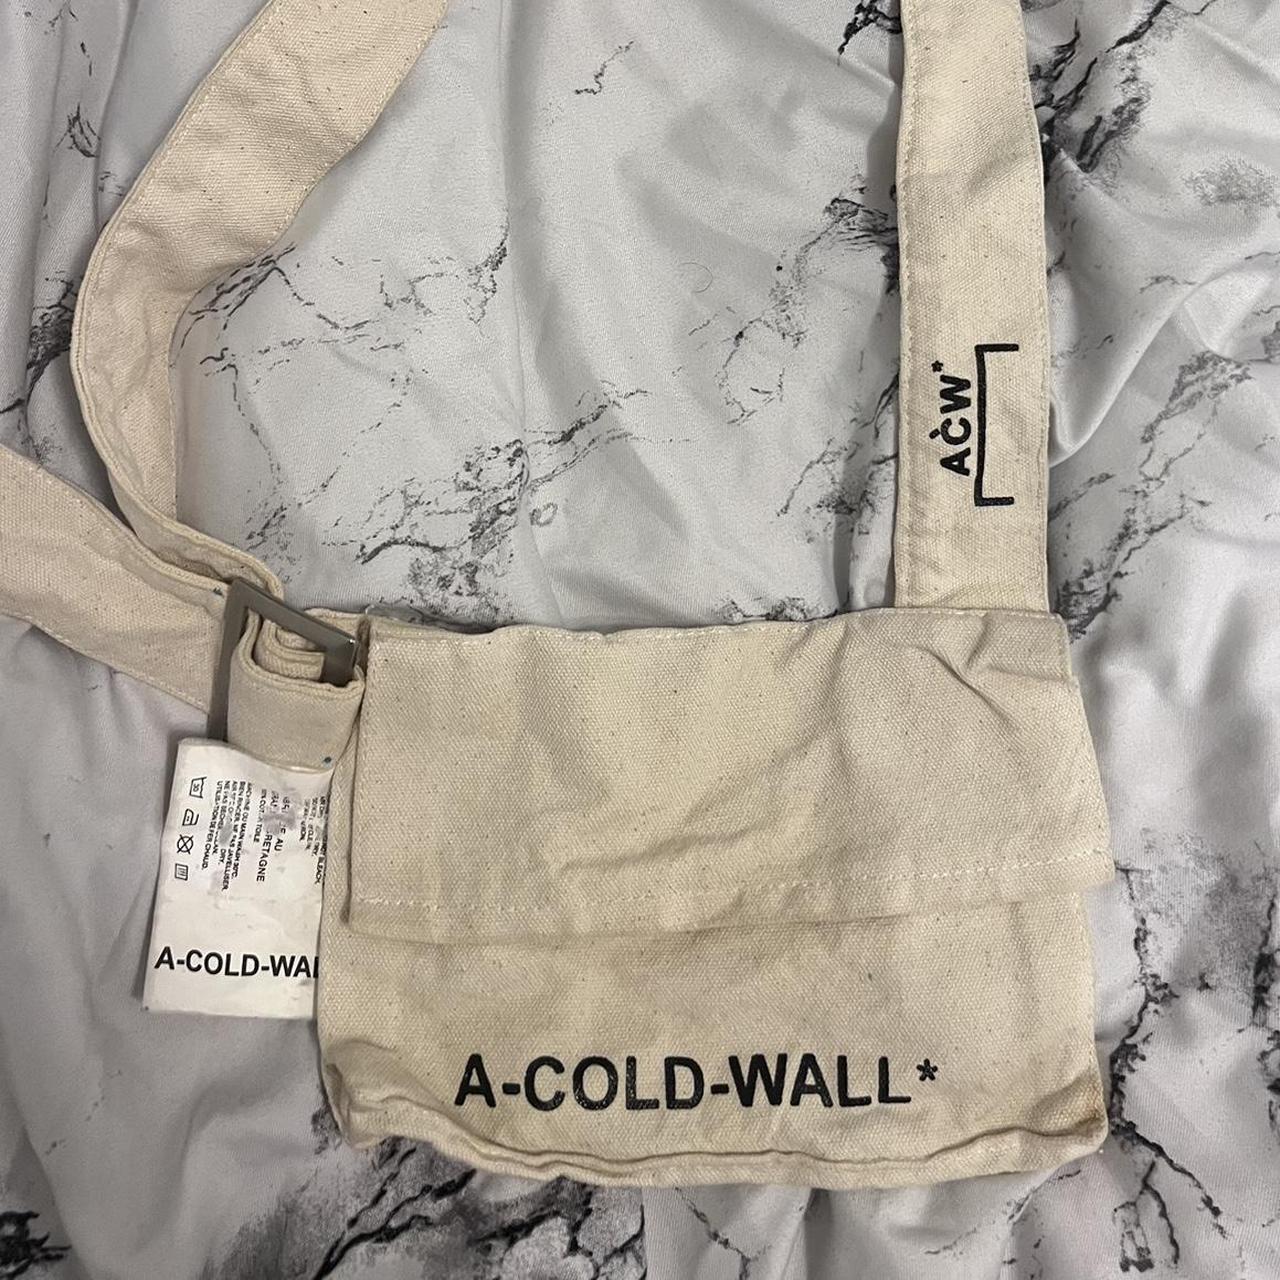 A-COLD-WALL Women's Bag